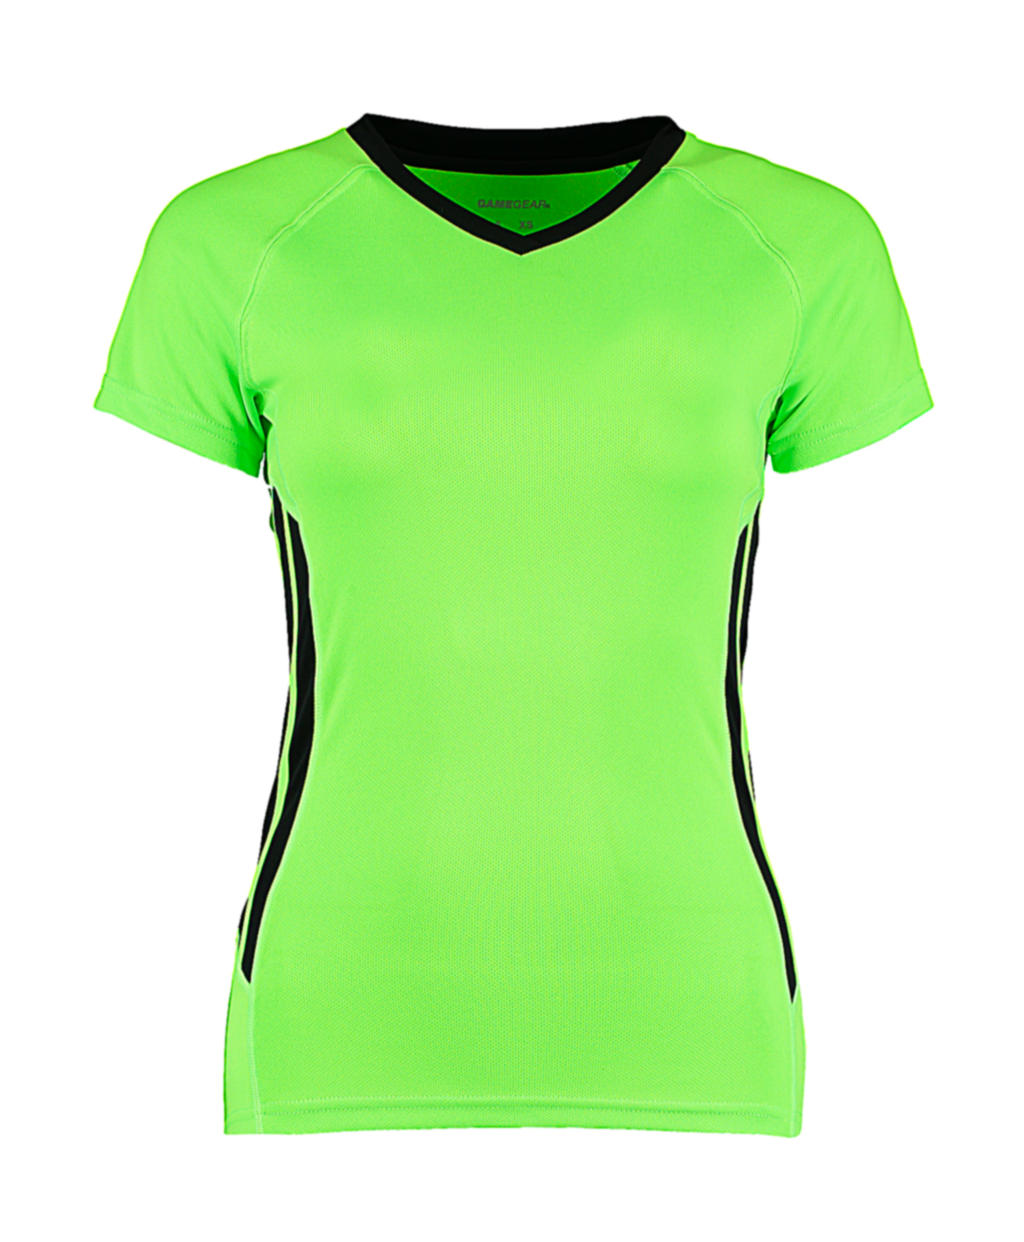  Womens Regular Fit Cooltex? Training Tee in Farbe Fluorescent Lime/Black